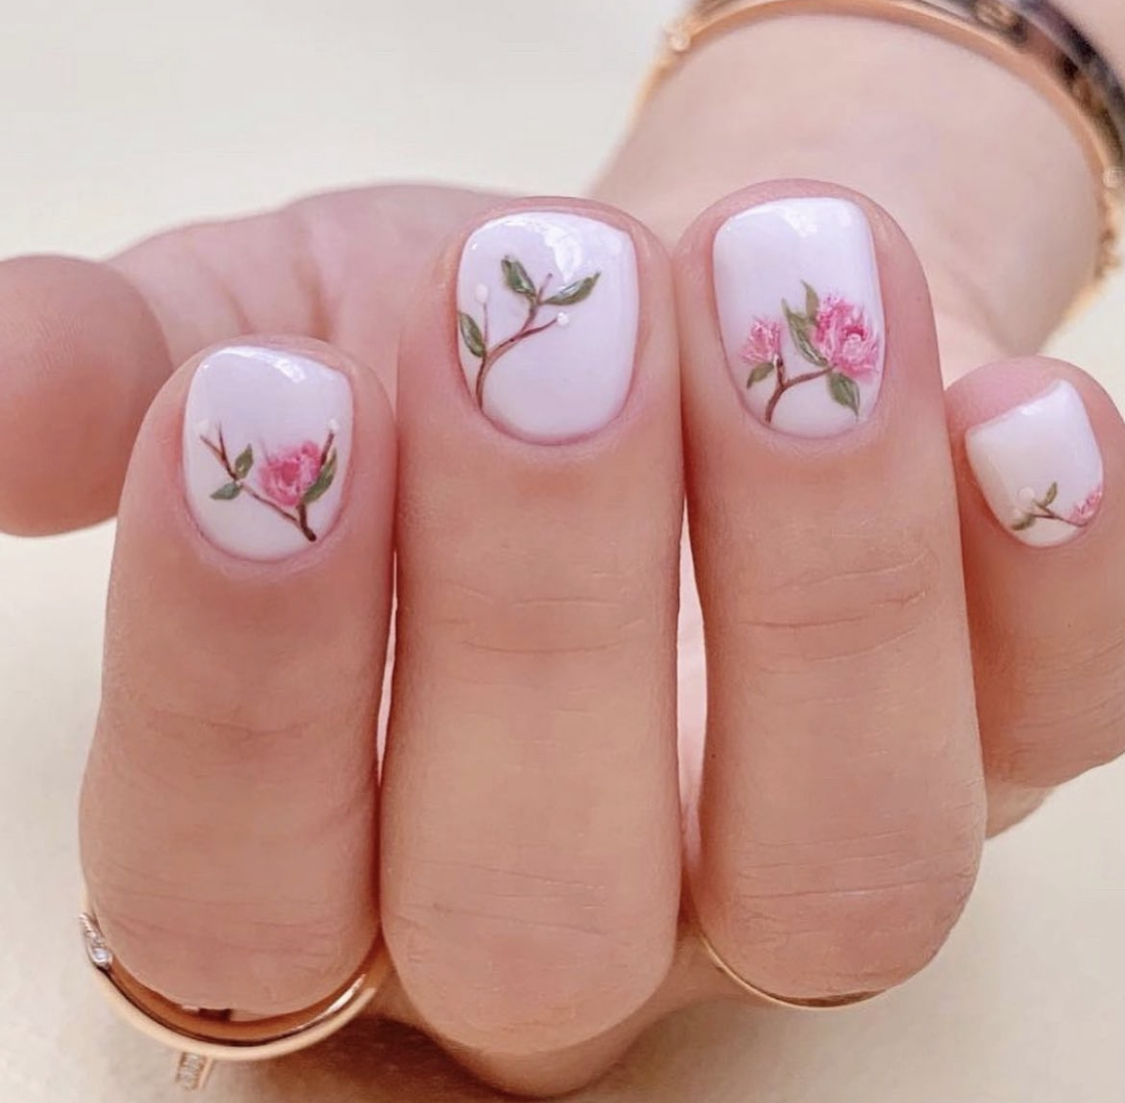 Dried Flower Nails Are the Trend For People Who Just Can't Quit Summer